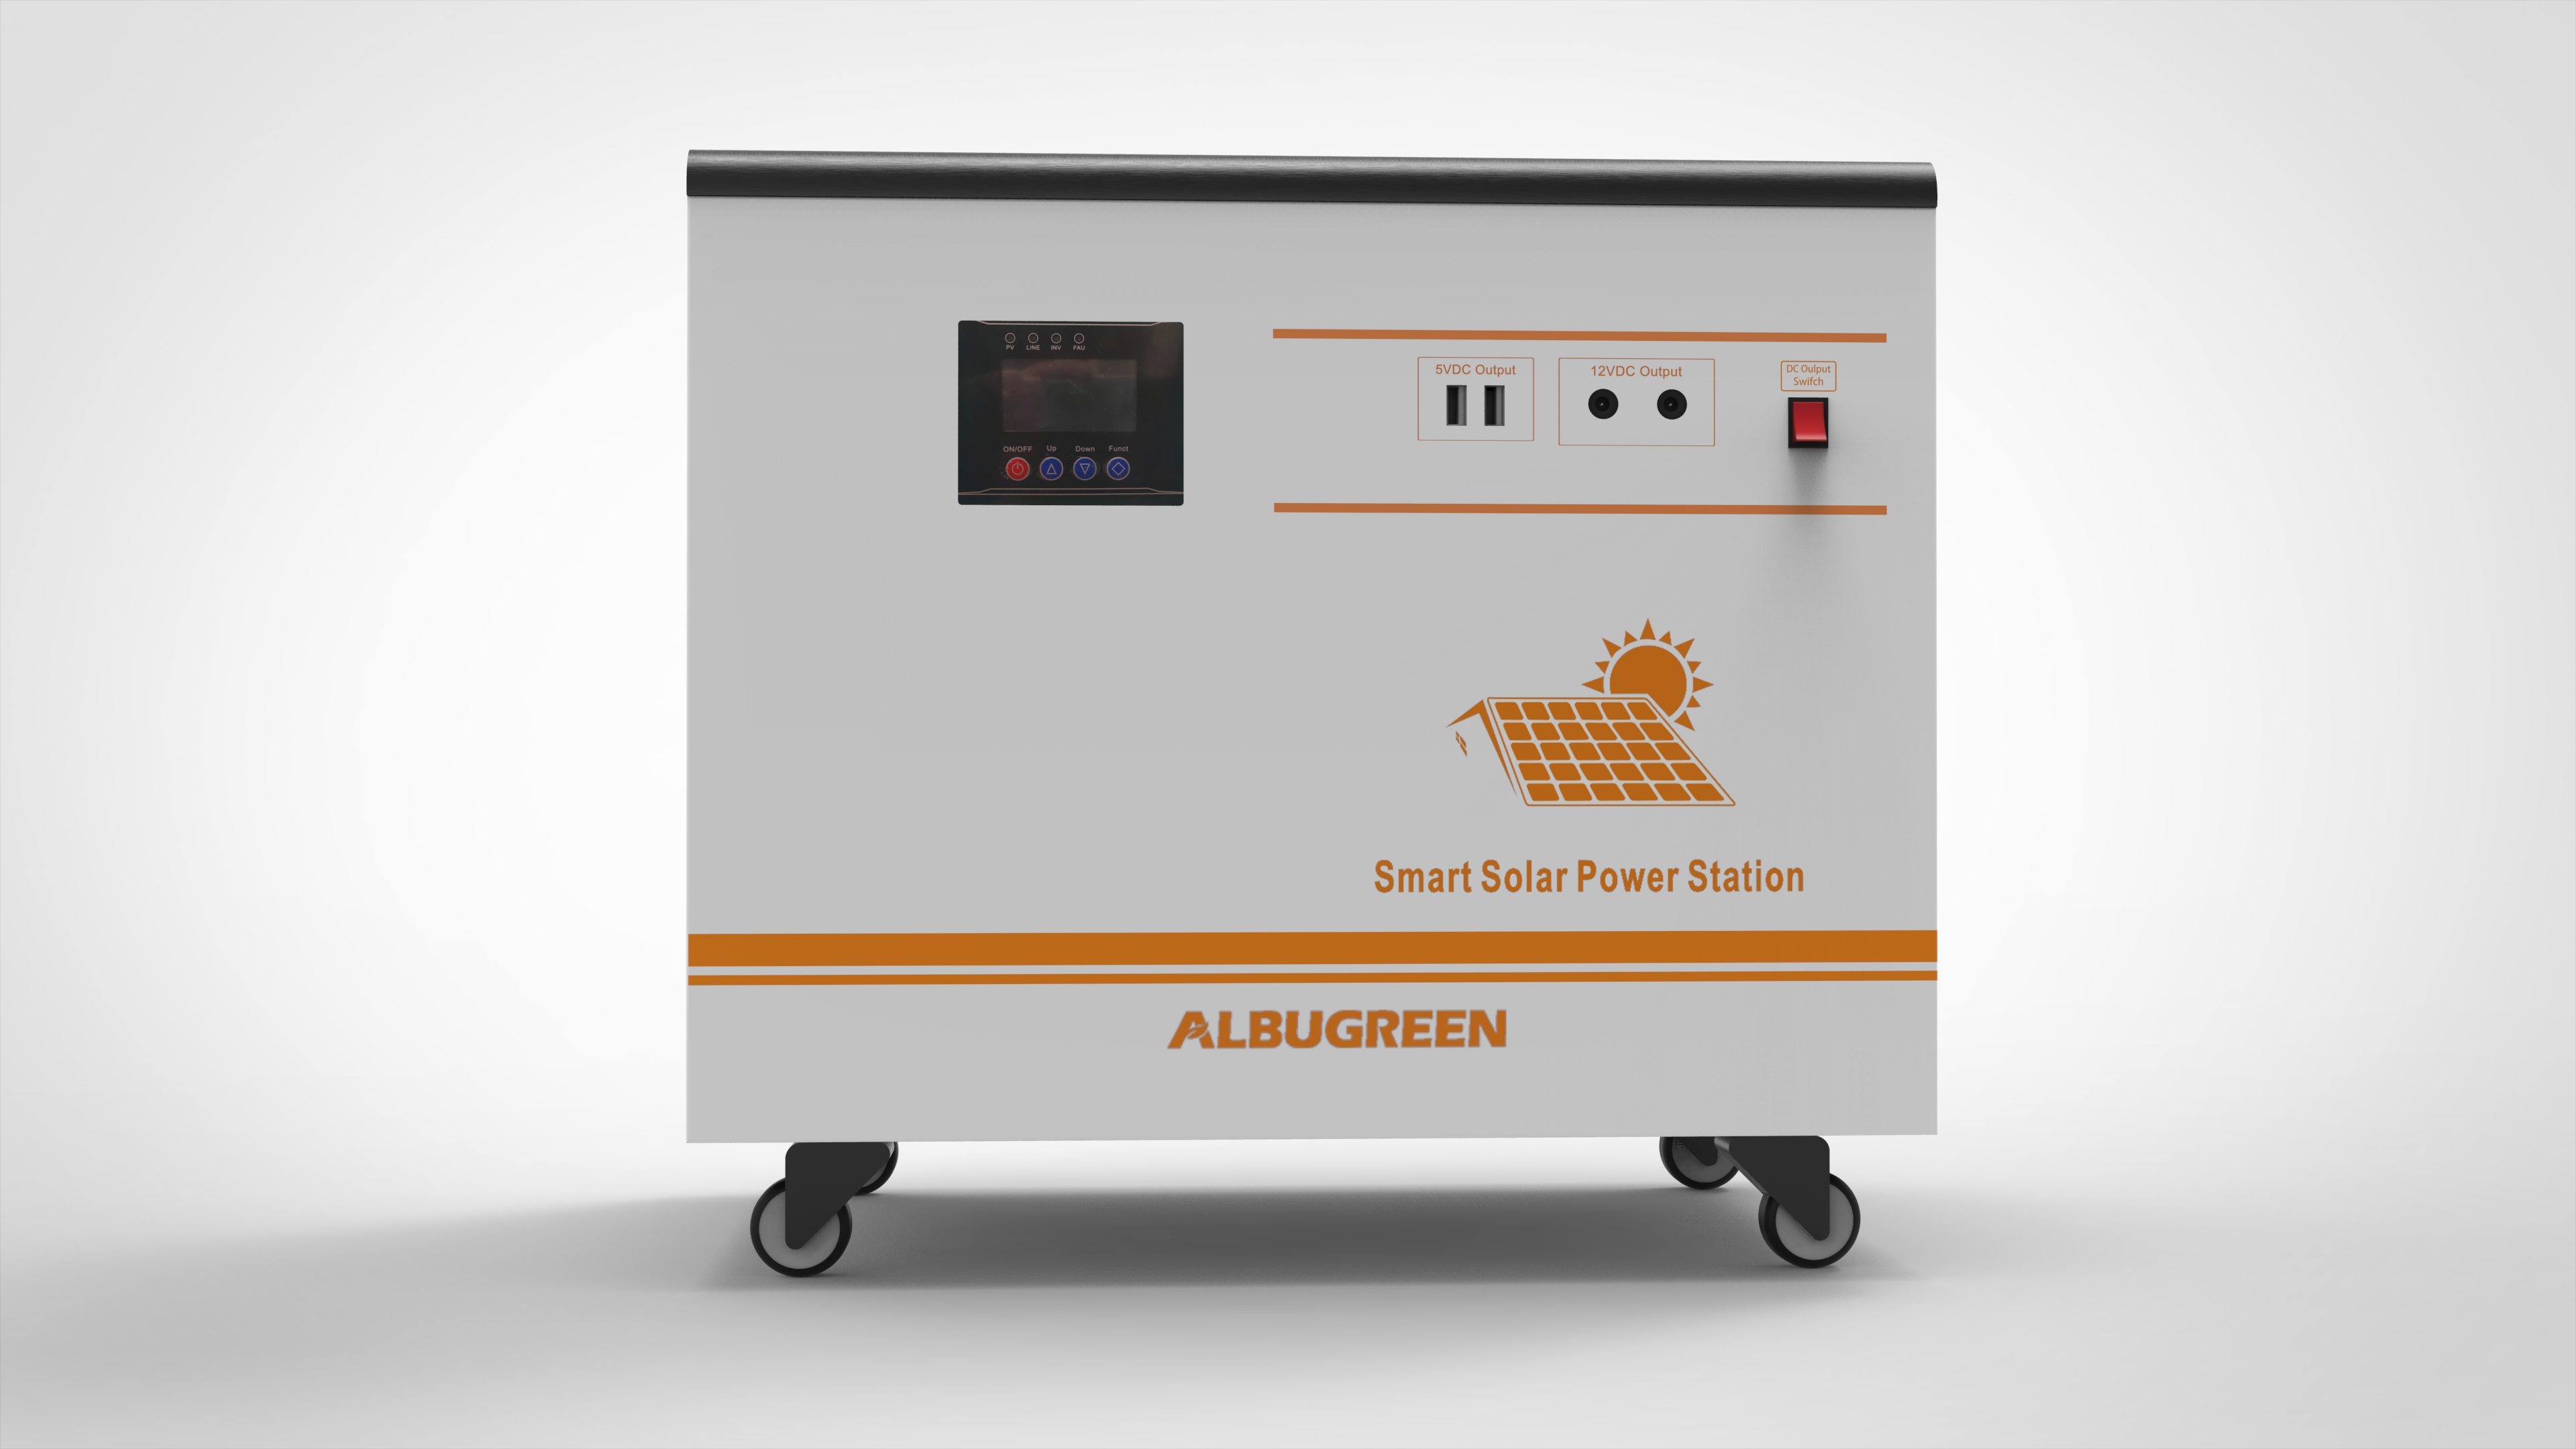 3000w 220v Lithium Ion in One Solar Power System for Campers